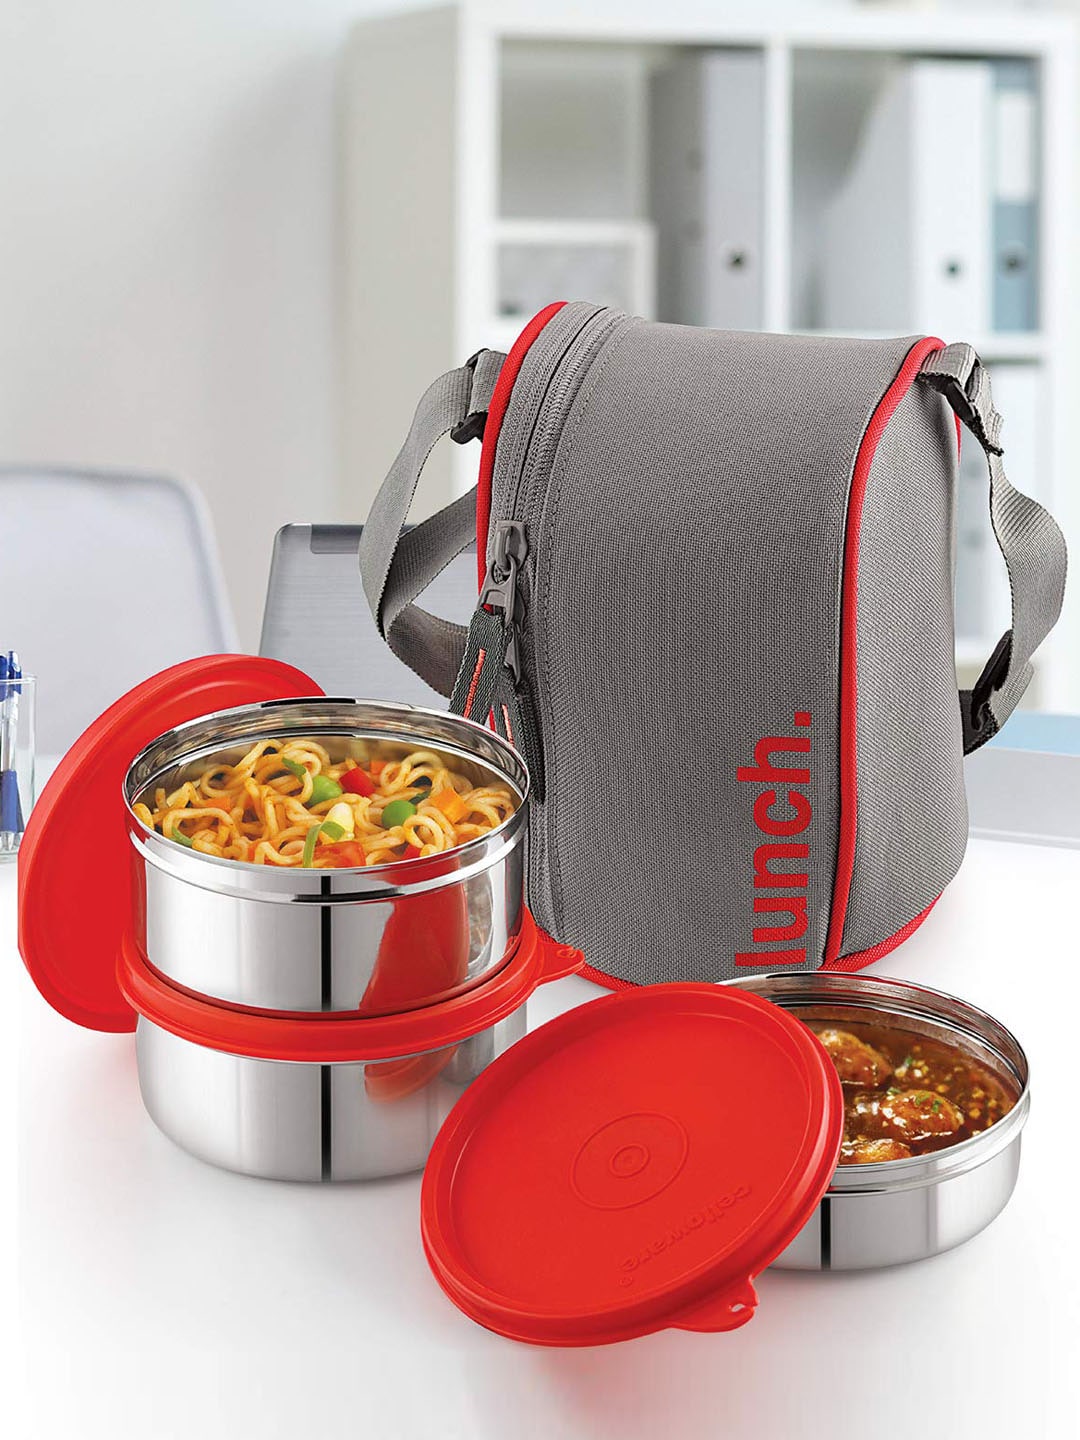 Cello Red & Silver-Toned Solid Stainless Steel Lunch Box With Bag Price in India